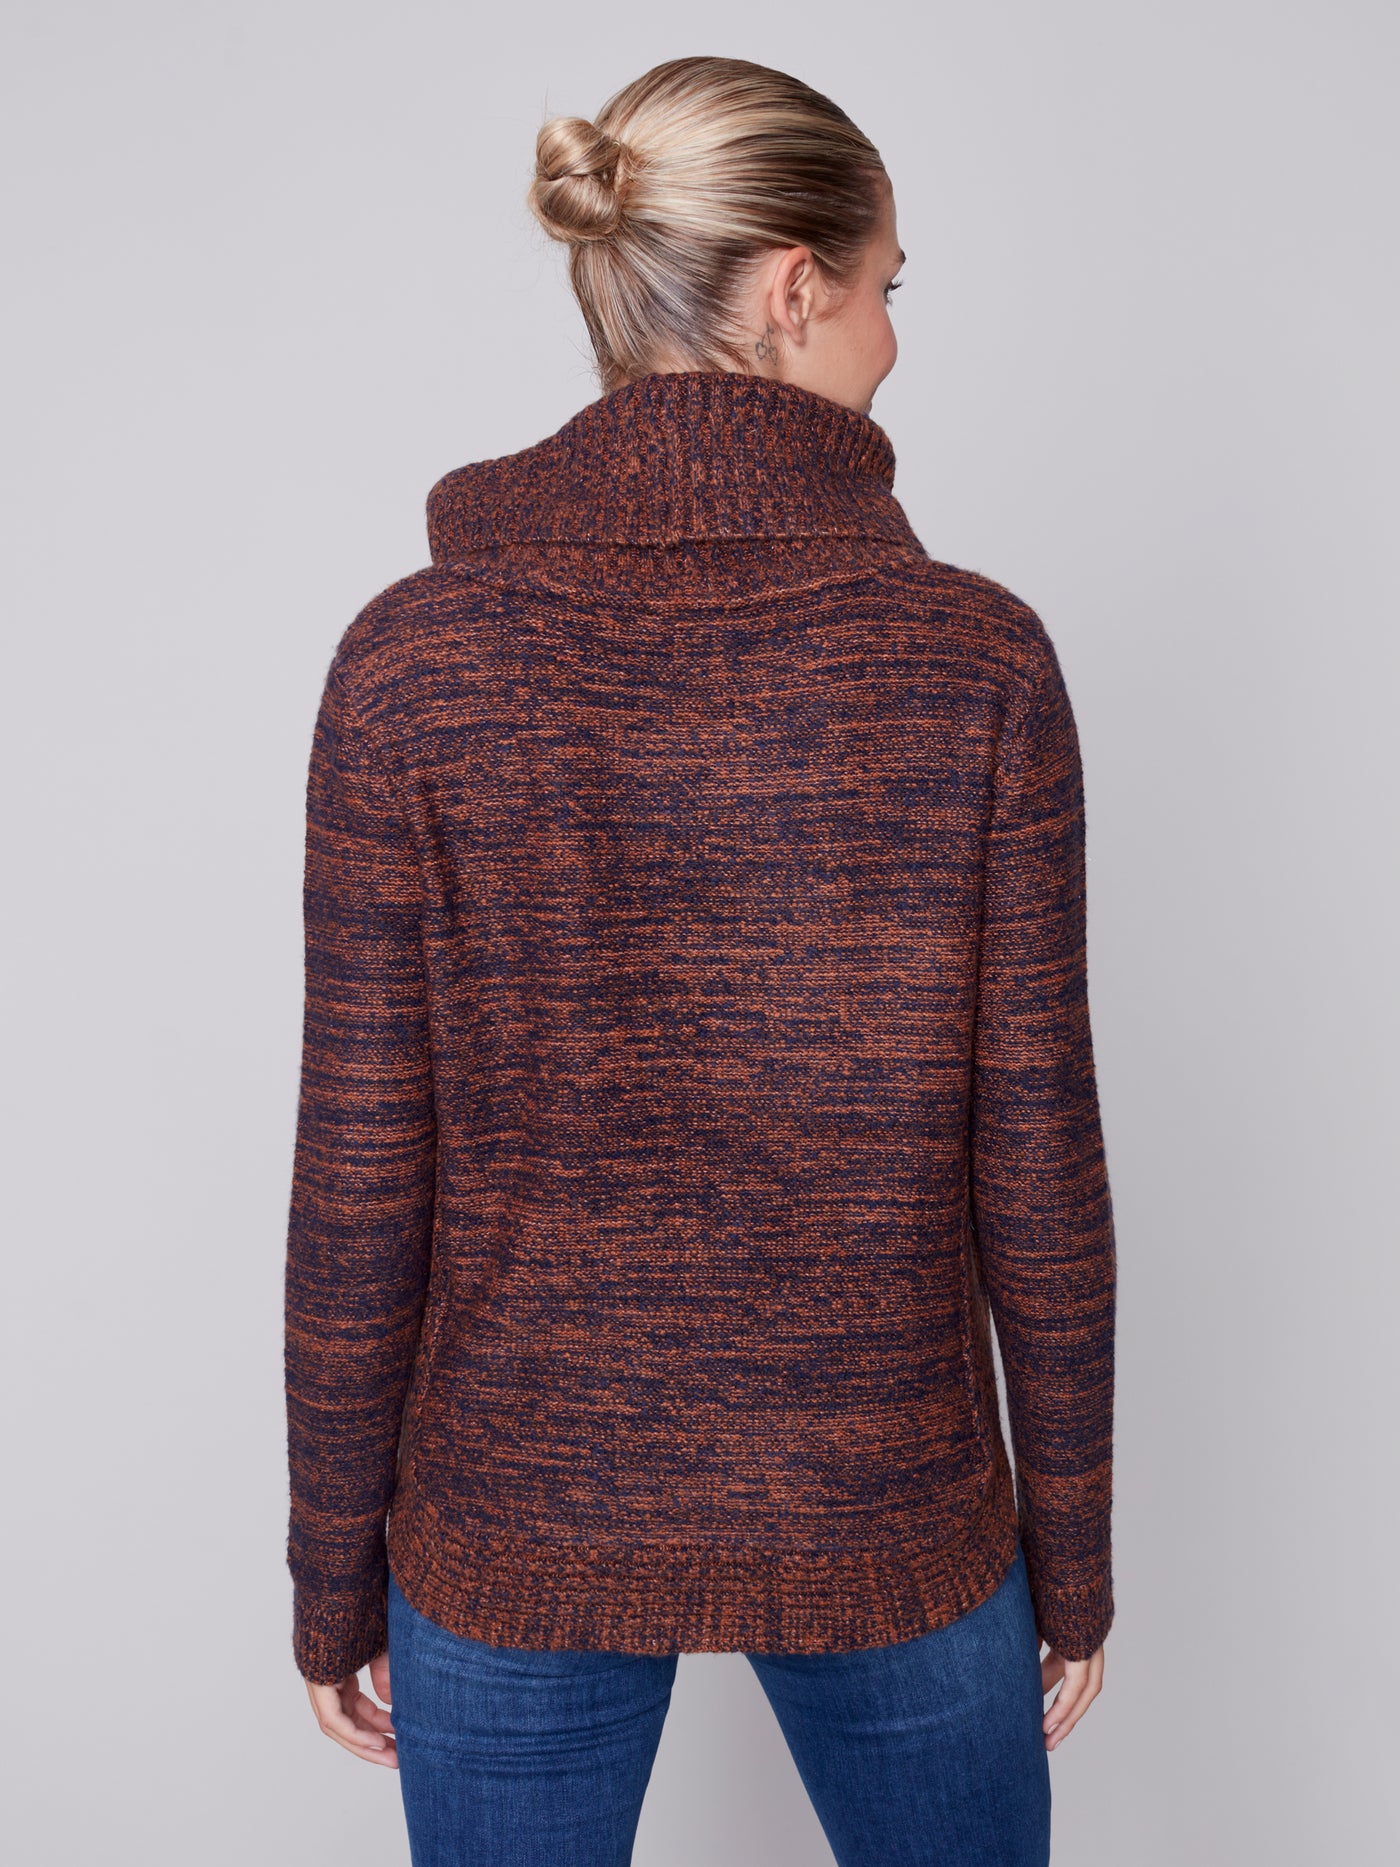 Cinnamon Chunky Cable Knit Sweater